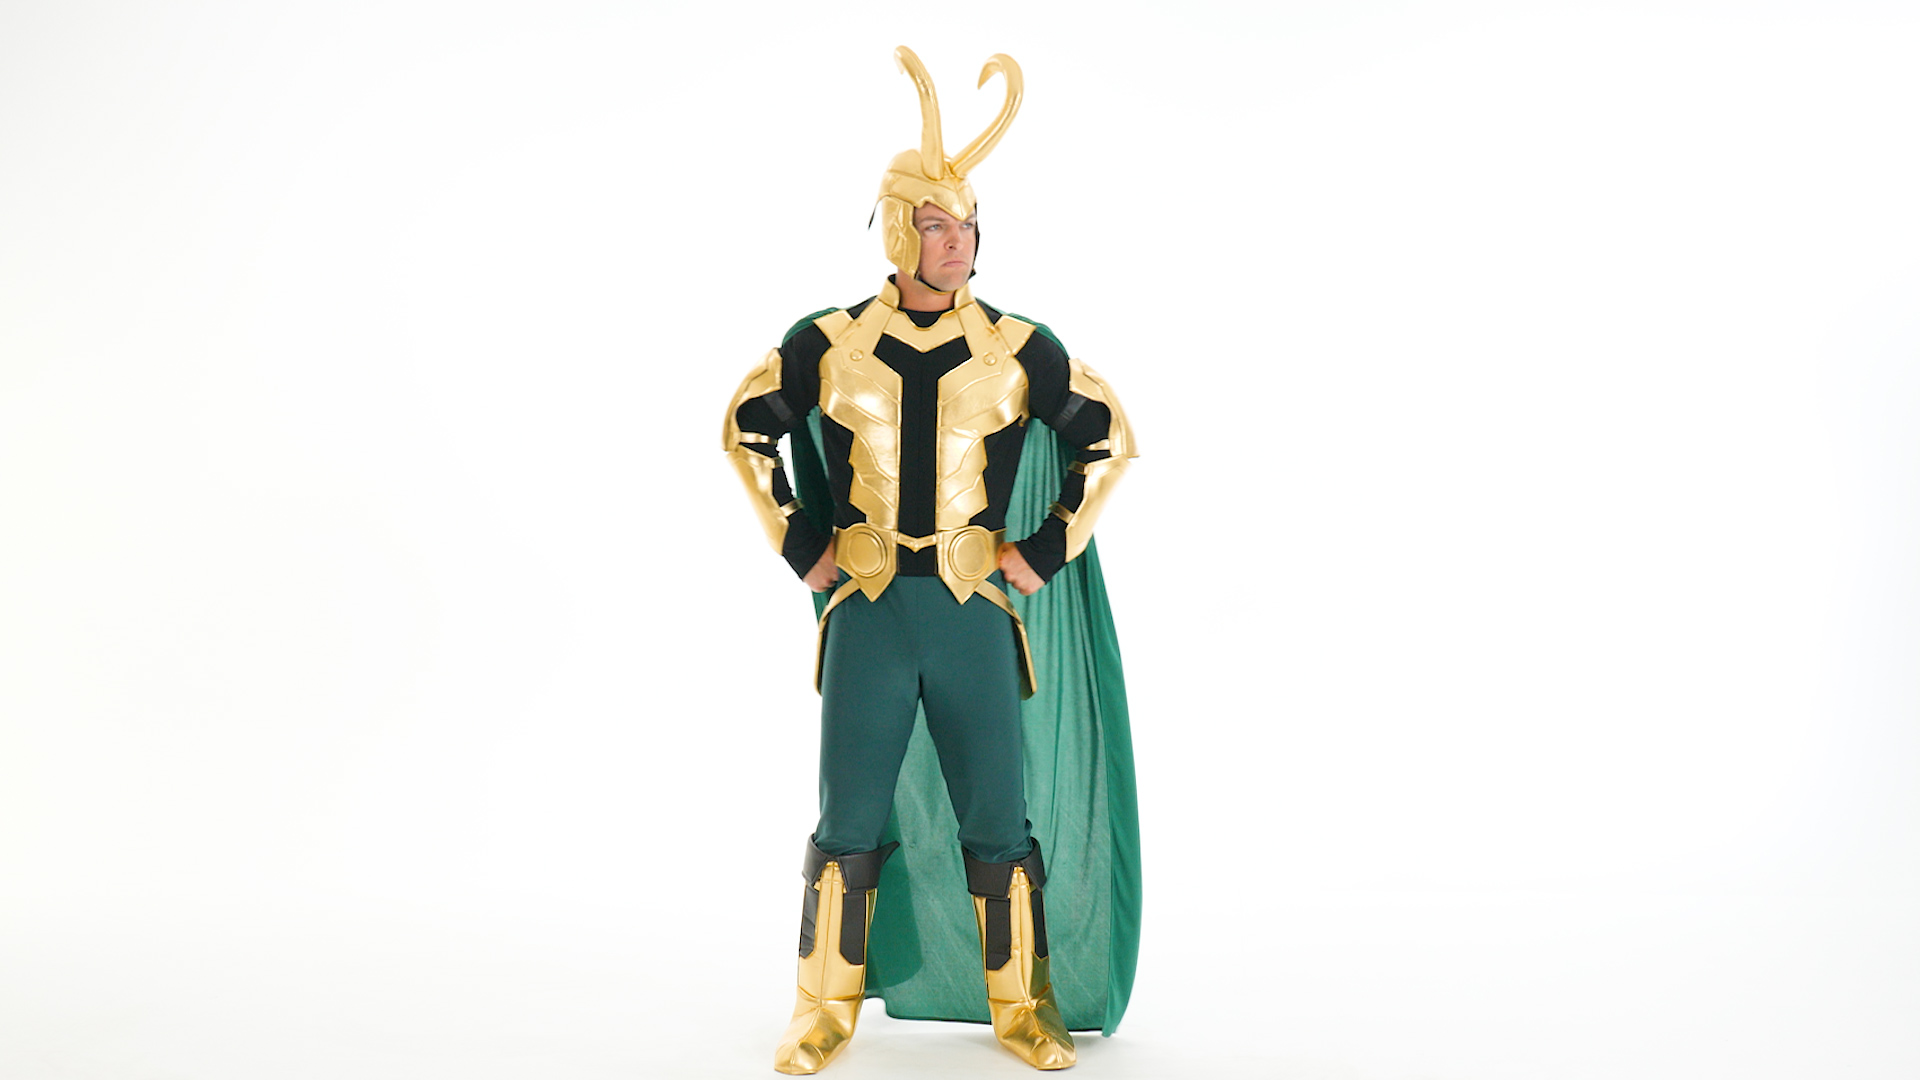 I am Loki, of Asgard, and I am burdened with glorious purpose. Channel your favorite Marvel villain Loki of Asgard with the Men's Marvel Loki Premium Costume!